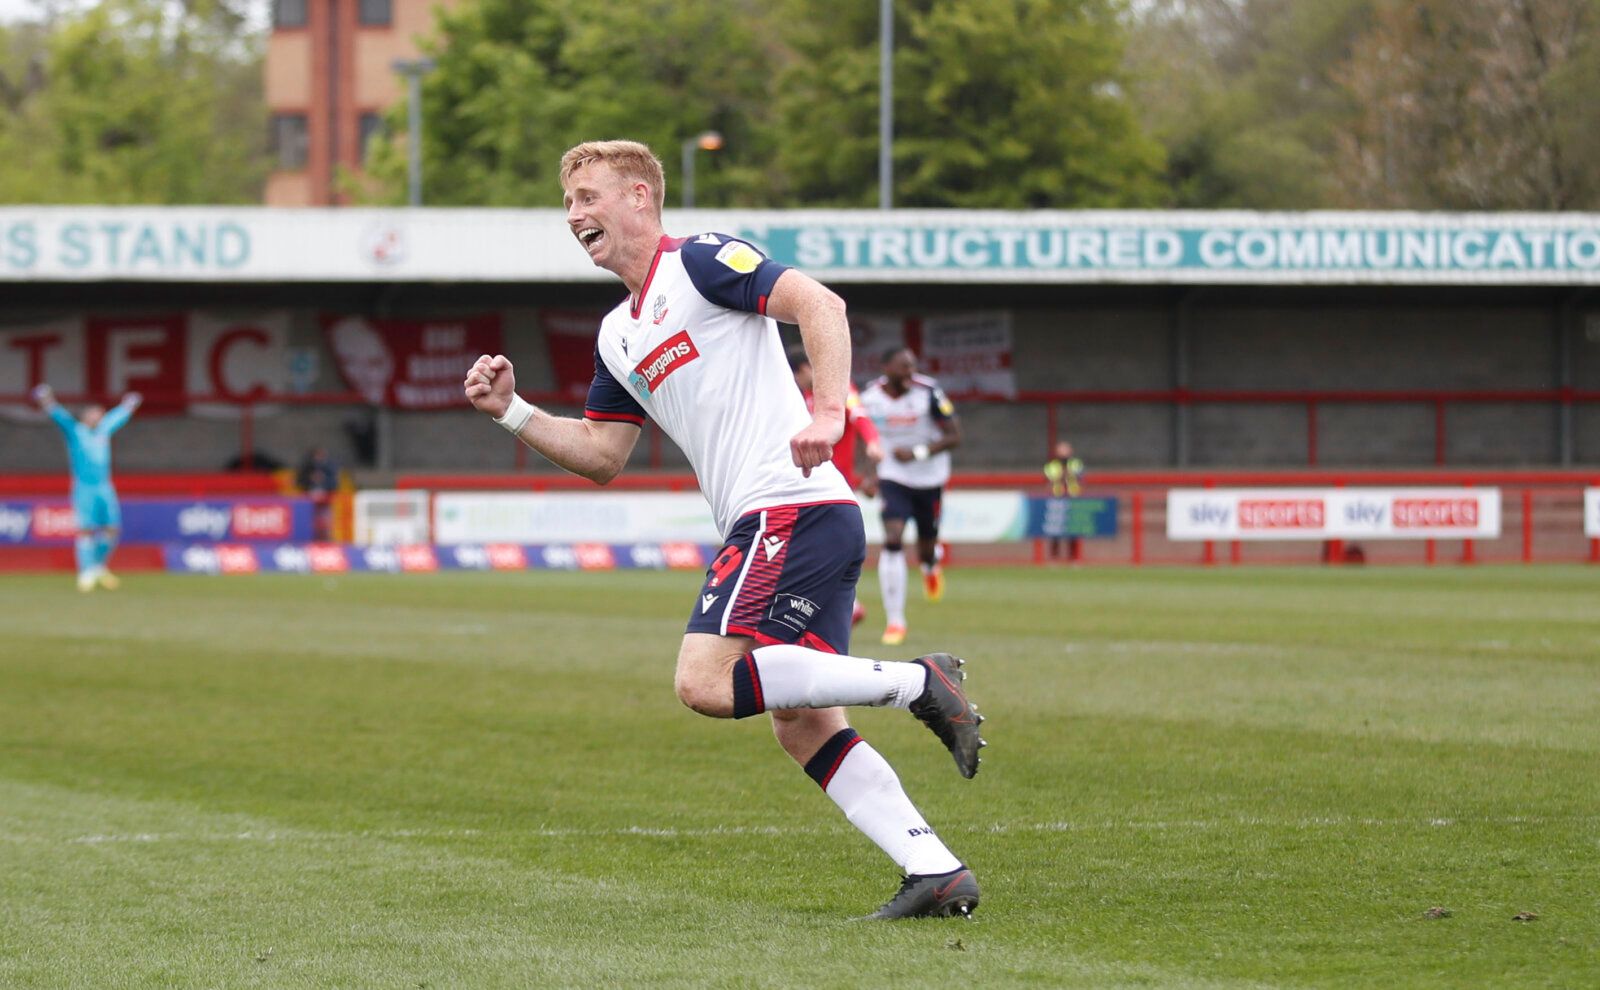 Soccer Football - League Two - Crawley Town v Bolton Wanderers- The People's Pension Stadium, Crawley, Britain - May 8, 2021  Bolton Wanderers' Eoin Doyle celebrates scoring their third goal Action Images/Matthew Childs EDITORIAL USE ONLY. No use with unauthorized audio, video, data, fixture lists, club/league logos or 'live' services. Online in-match use limited to 75 images, no video emulation. No use in betting, games or single club /league/player publications.  Please contact your account re